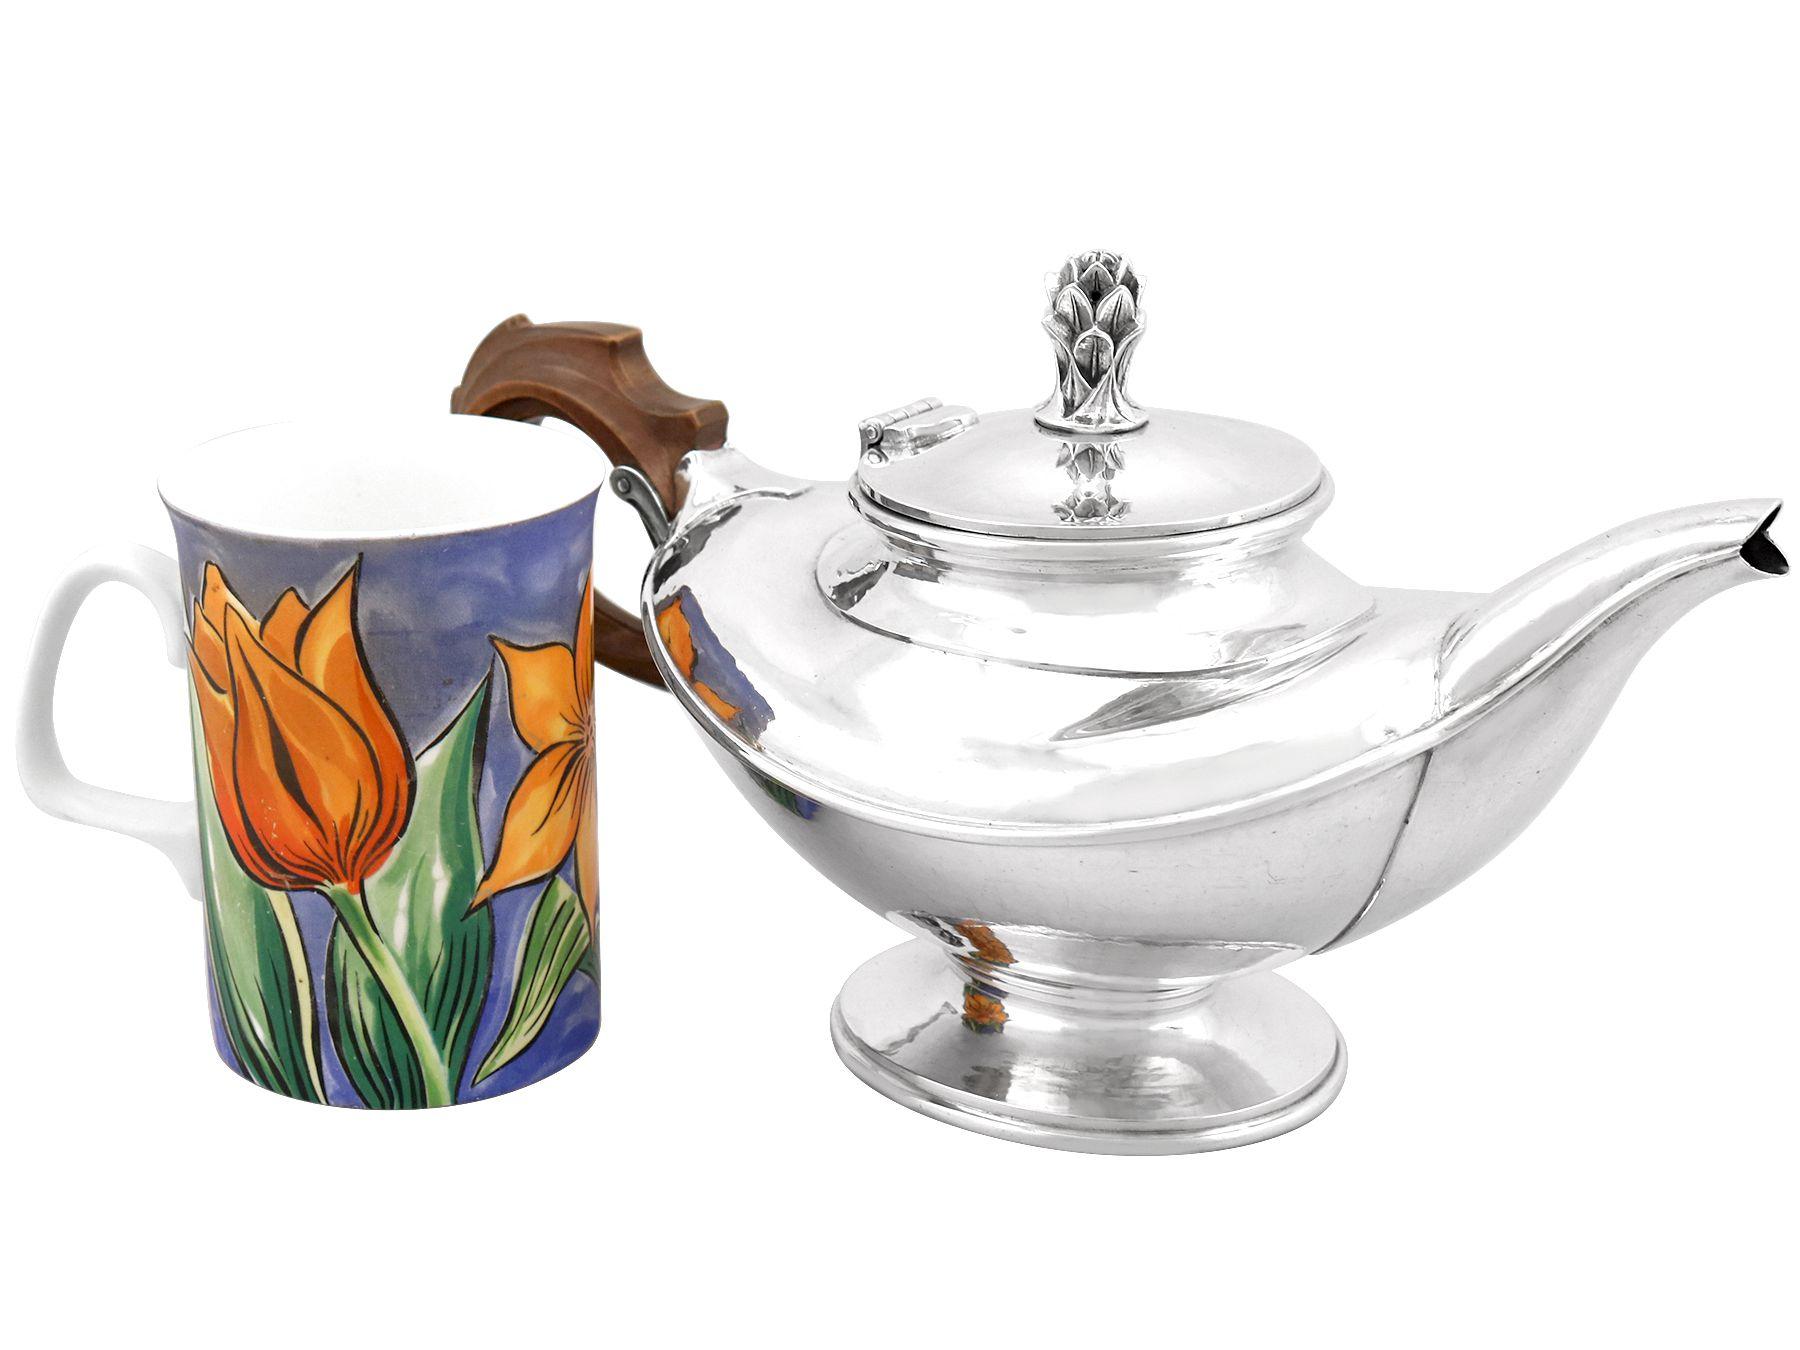 An exceptional, fine and impressive antique George V English sterling silver teapot made by Omar Ramsden; an addition to our collectable silver teaware collection.

This exceptional antique George V English sterling silver teapot has an oval boat